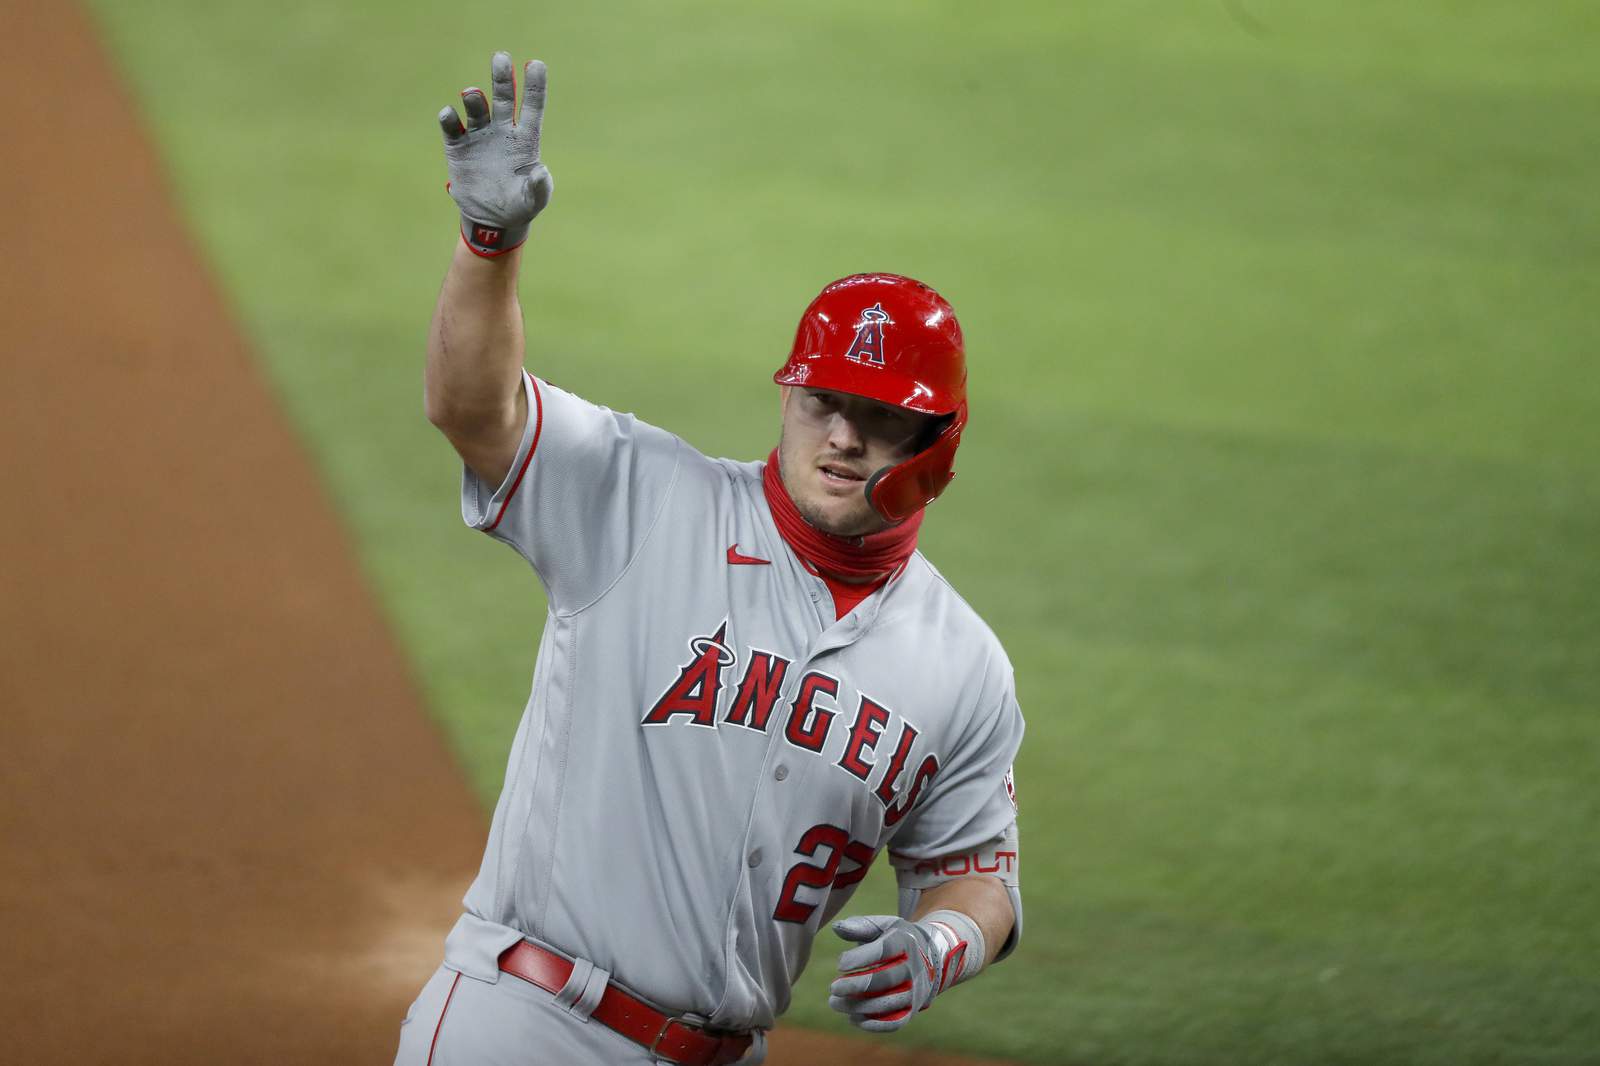 Trout homers again on birthday, but Angels fall to Rangers